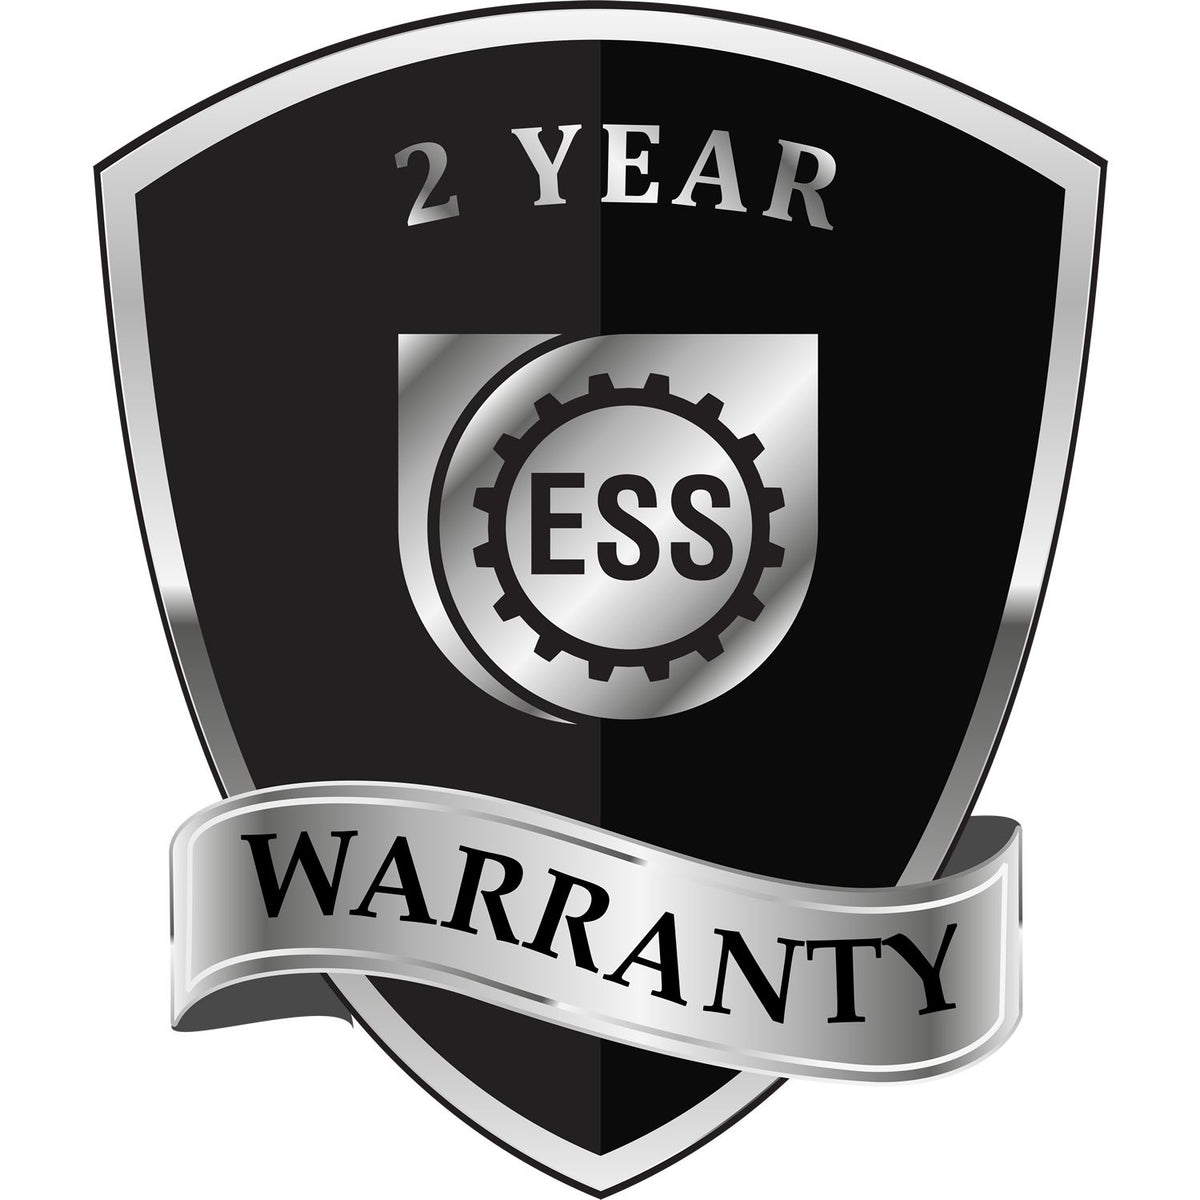 A black and silver badge or emblem showing warranty information for the Gift Pennsylvania Engineer Seal